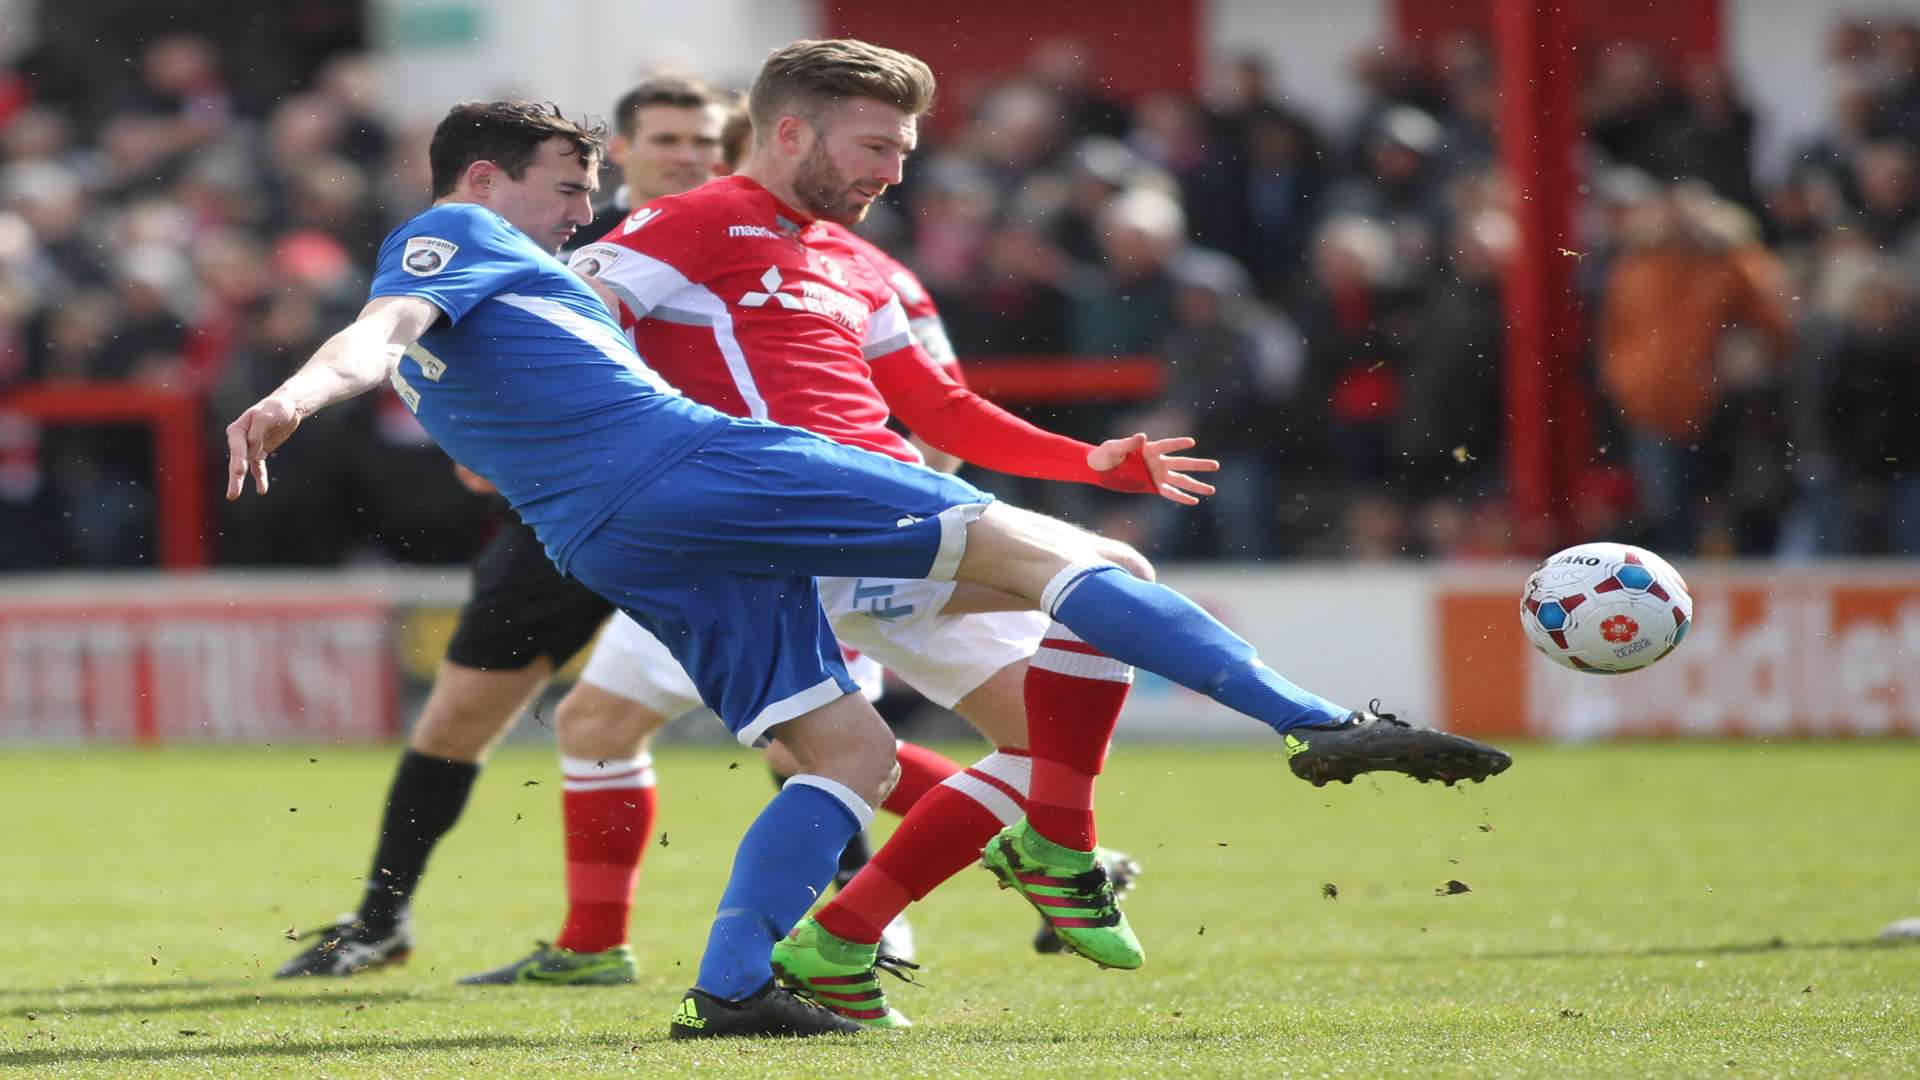 Danny Harris gets a shot away during the 1-1 draw at Ebbsfleet Picture: John Westhrop